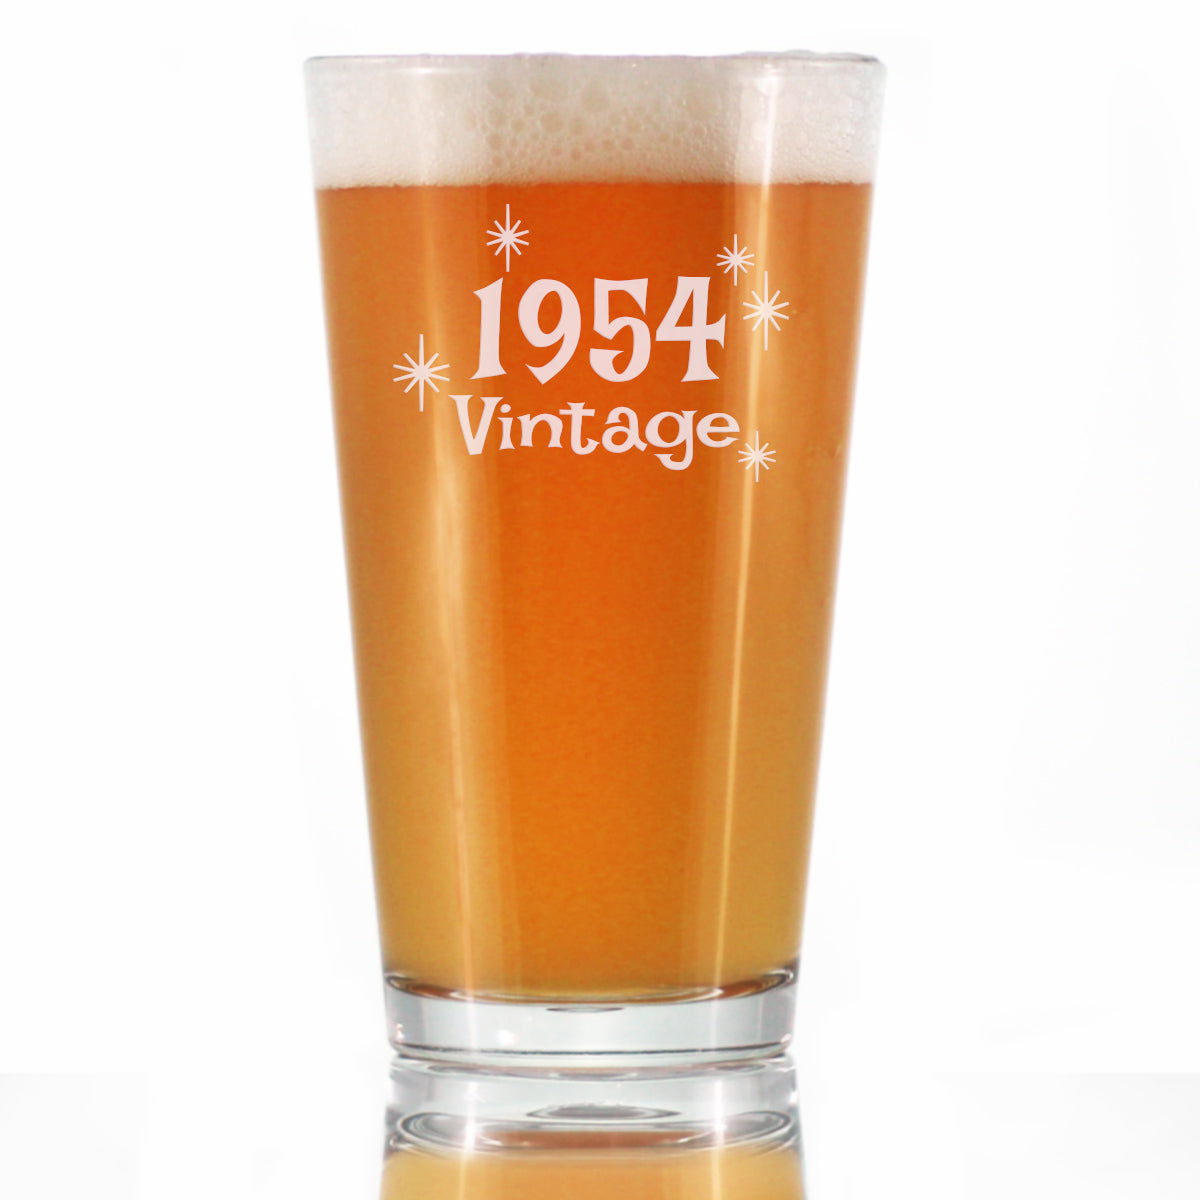 Vintage 1954 - Pint Glass for Beer - 69th Birthday Gifts for Men or Women Turning 69 - Fun Bday Party Decor - 16 oz